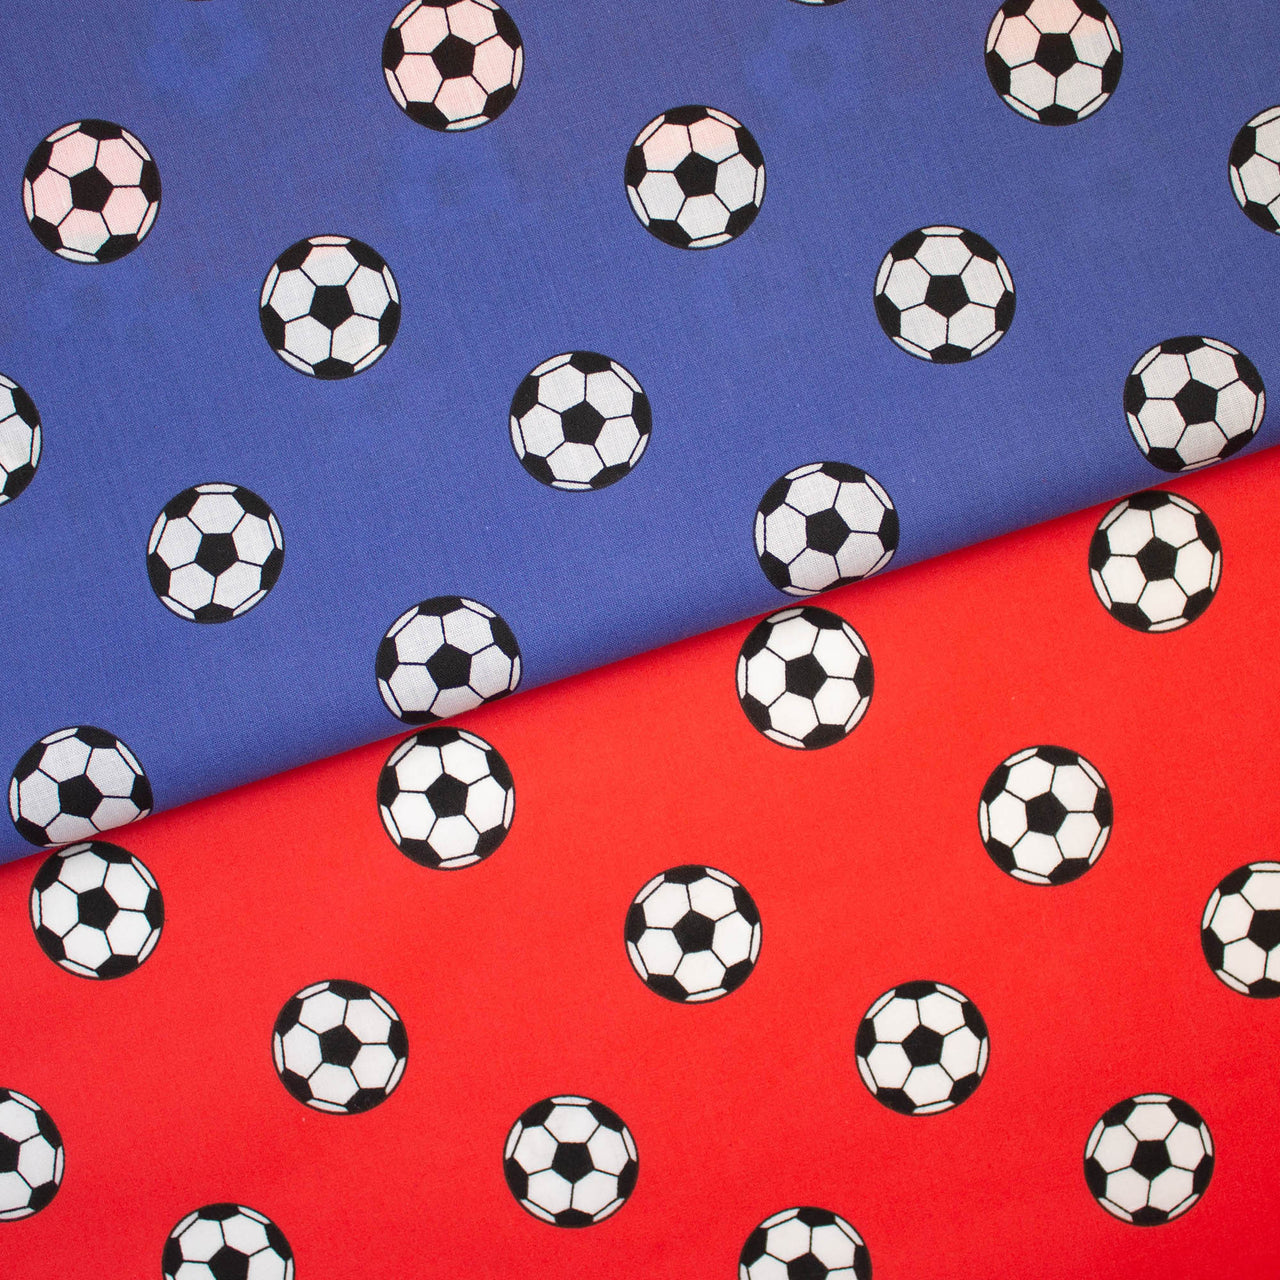 Football Footballs Soccer balls Printed Poly Cotton Fabric Red and or Blue